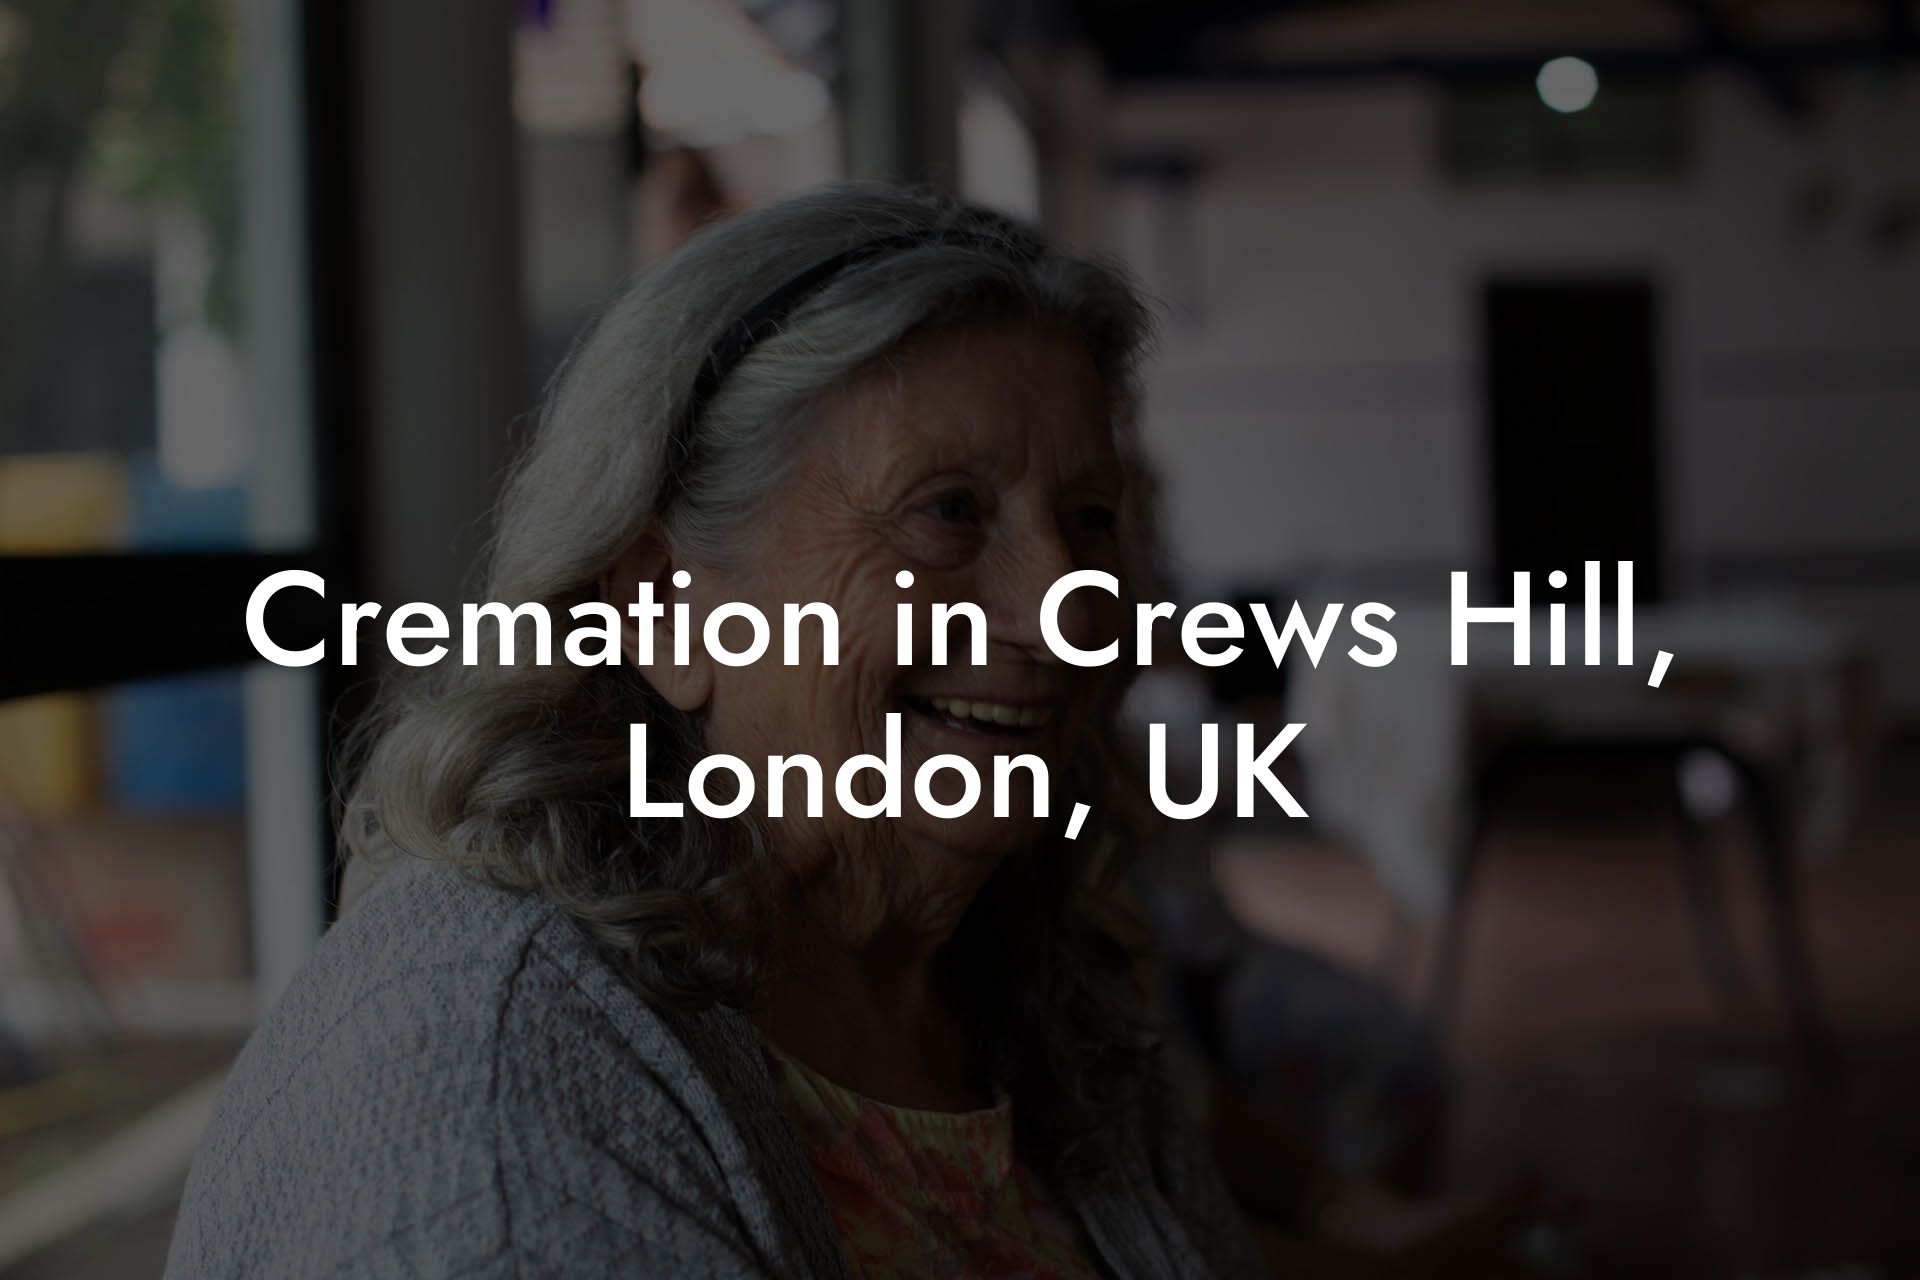 Cremation in Crews Hill, London, UK